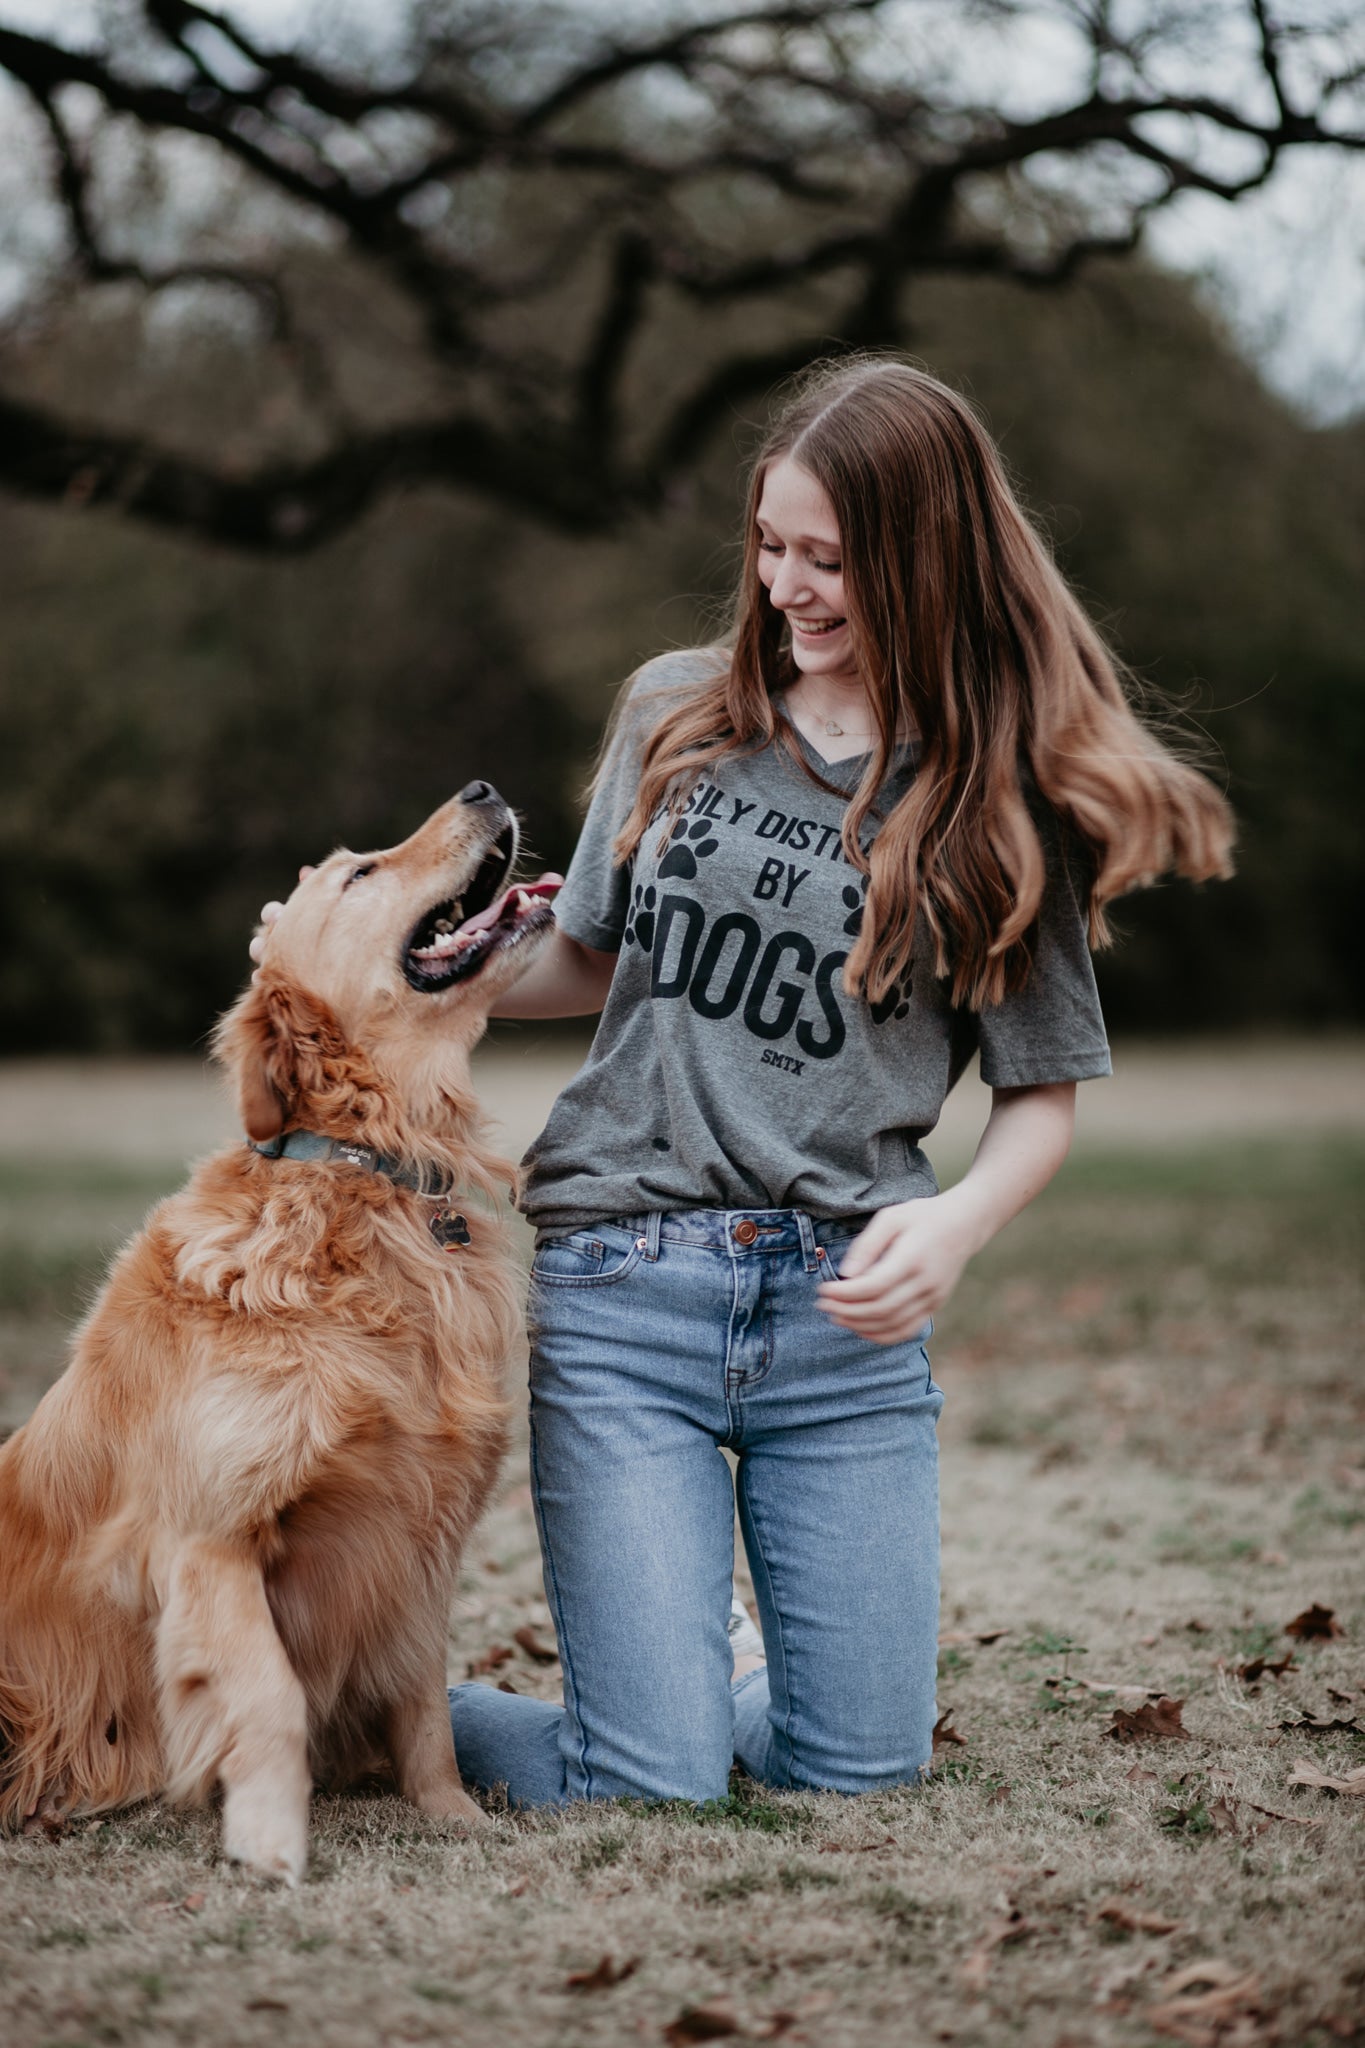 Easily Distracted By Dogs Graphic Tee